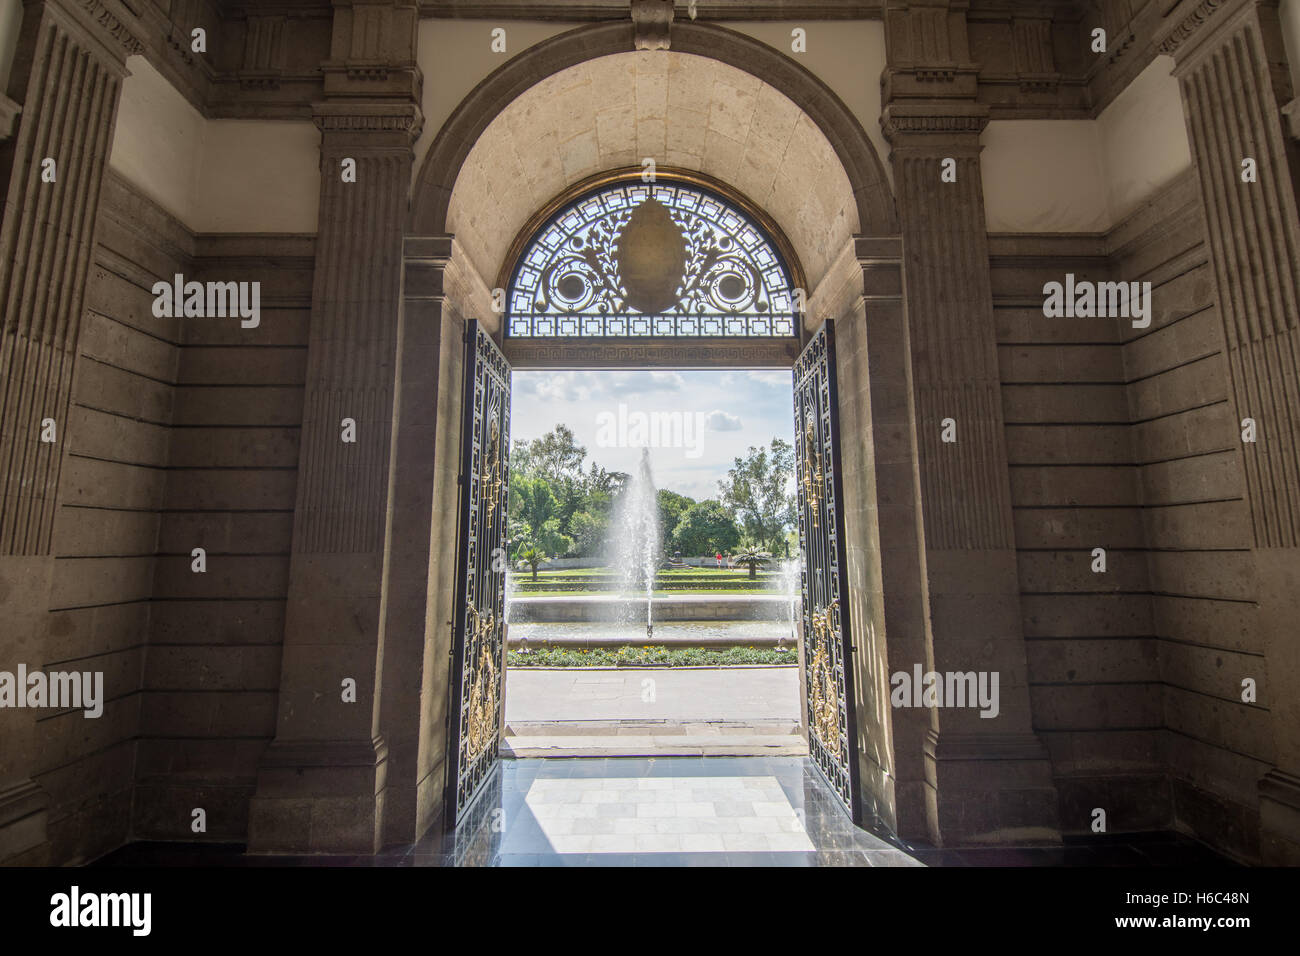 Looking out into the garden of Chapultepec Castle, Mexico City. Stock Photo